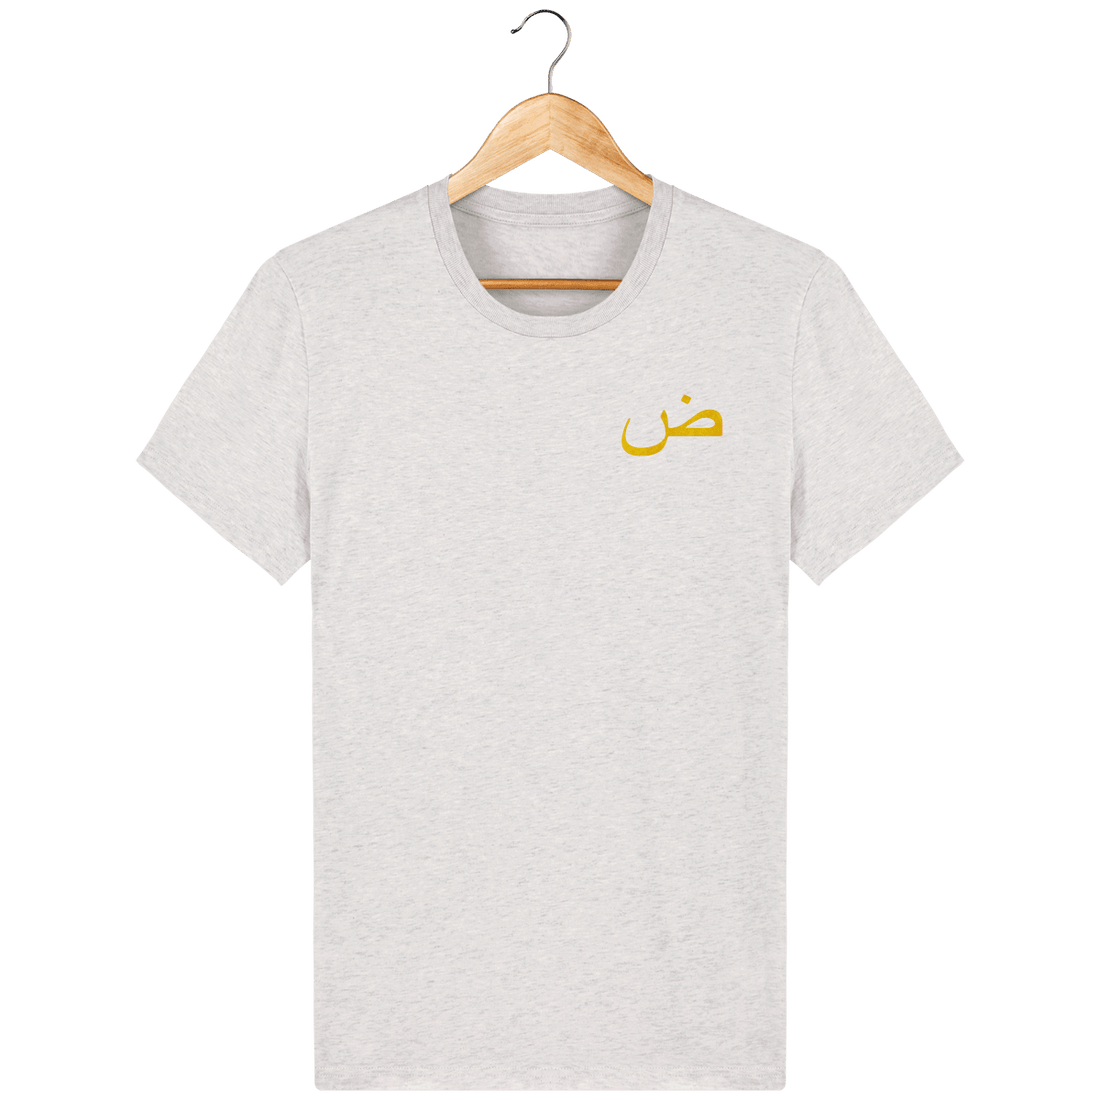 Unisexe>Tee-shirts - T-Shirt Homme <br>  Lettre Arabe Daad